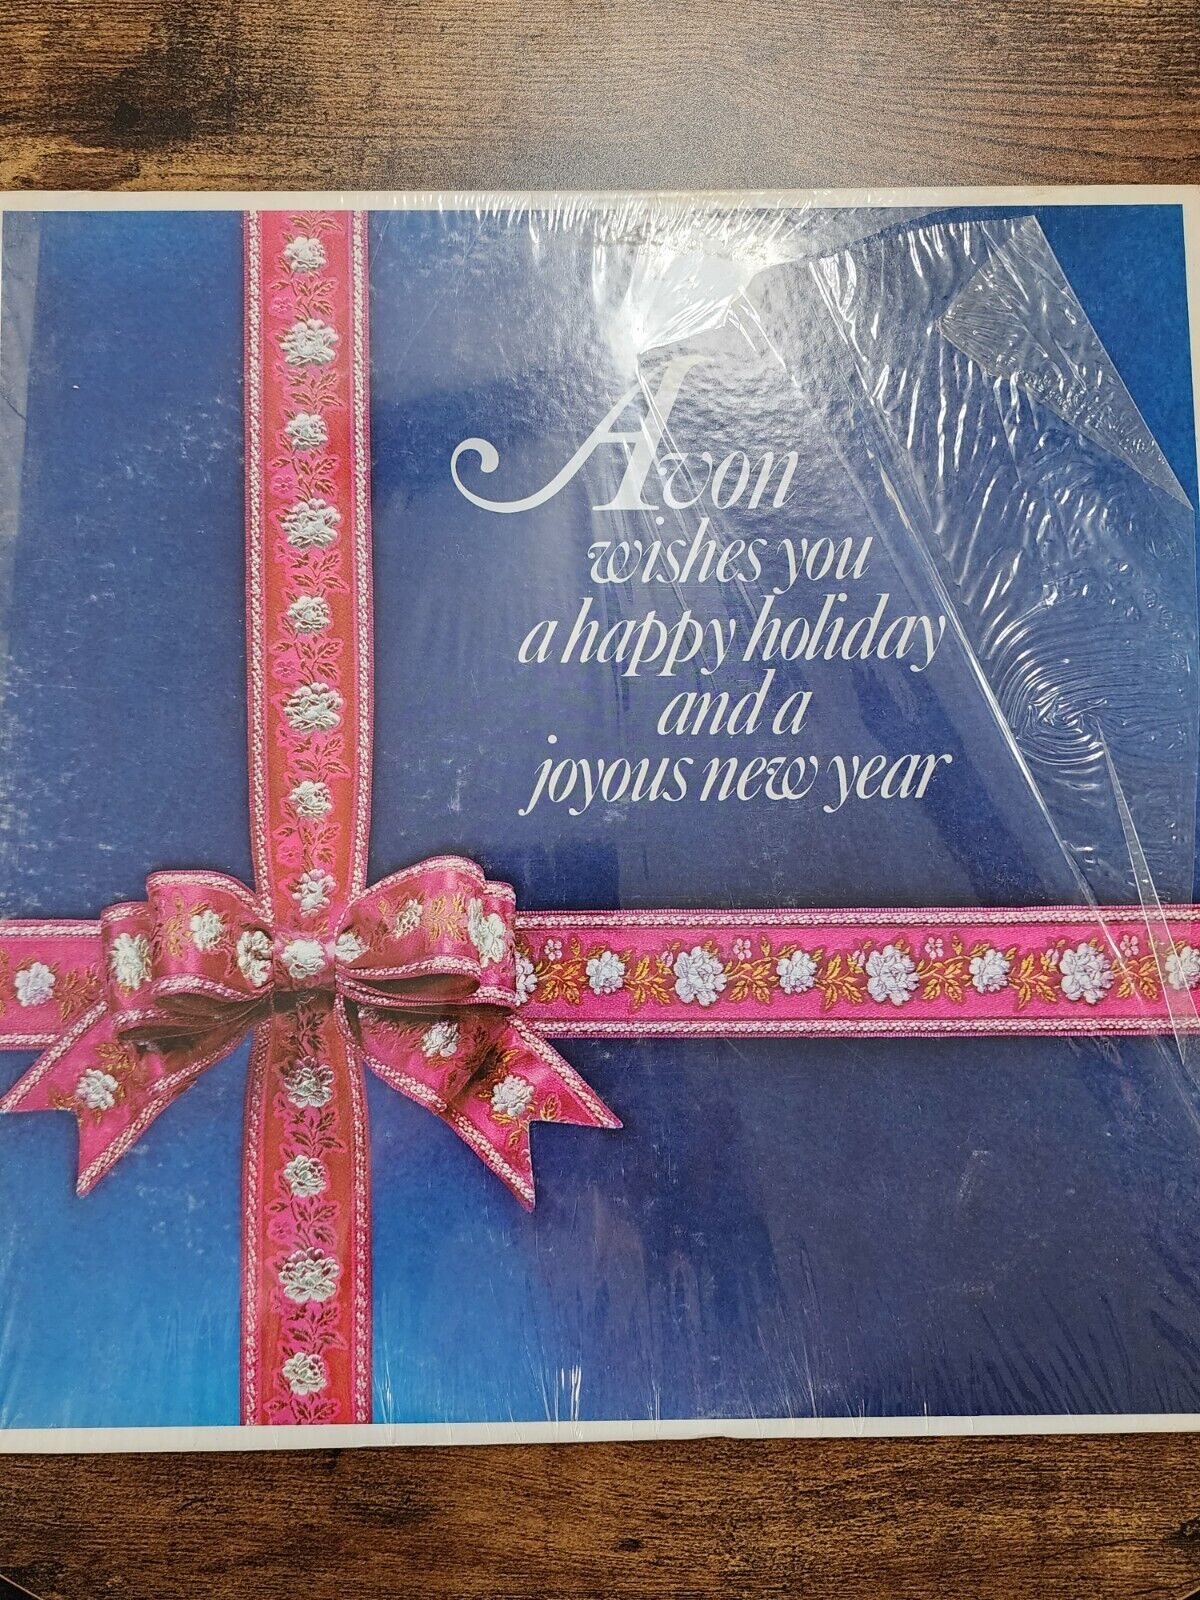 Tested-Avon Wishes You A Happy Holiday And A Joyous New Year - Vinyl Record LP